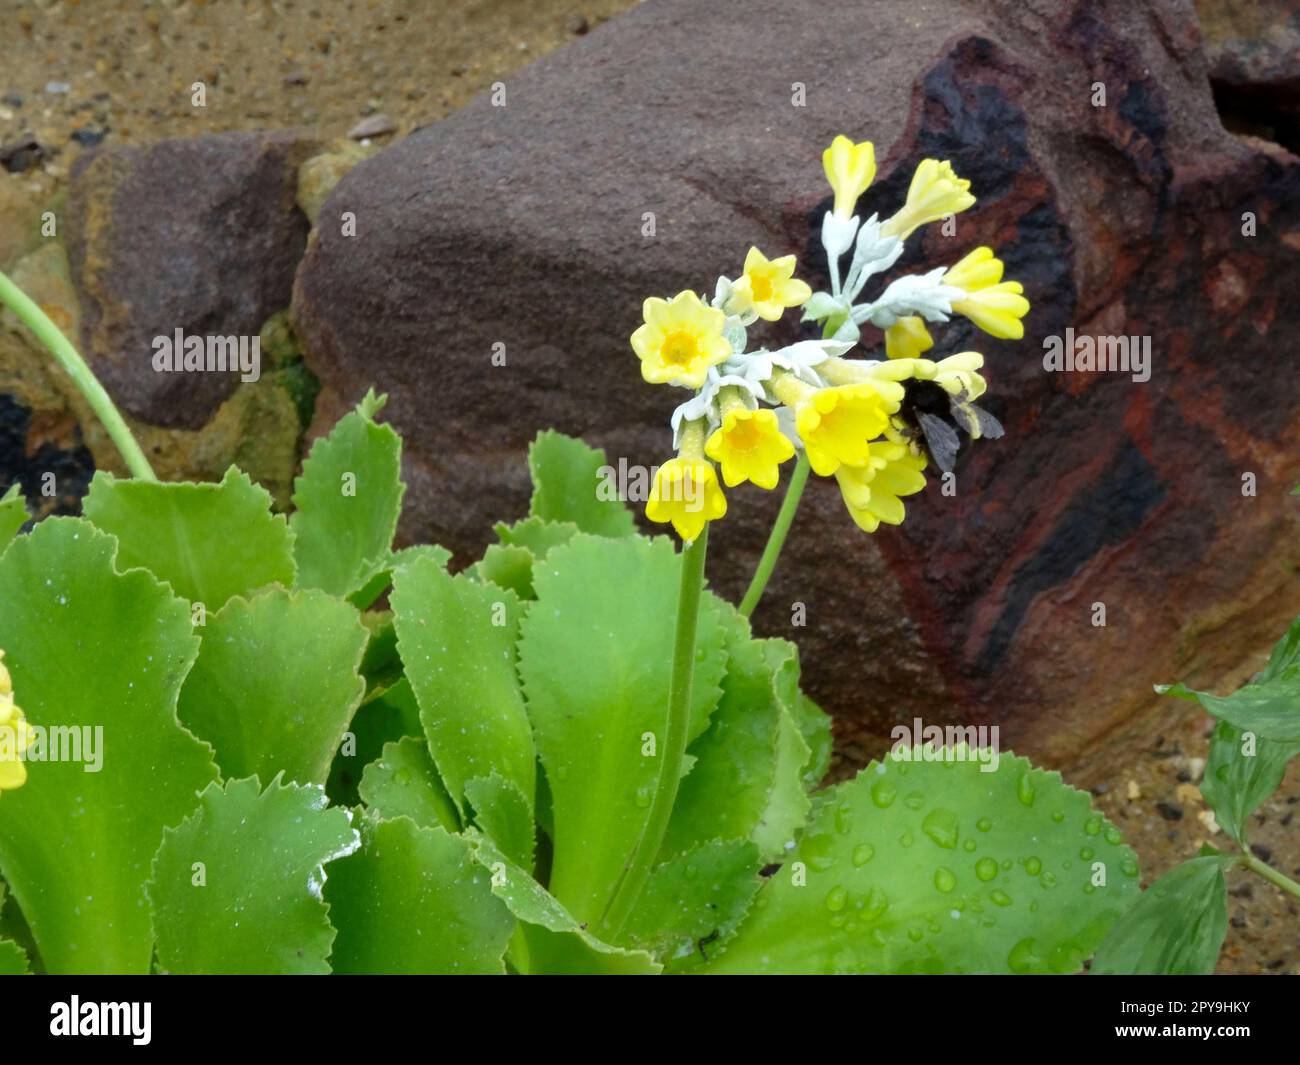 Natural close up flowering plant portrait of Primula Palinuri in bloom Stock Photo